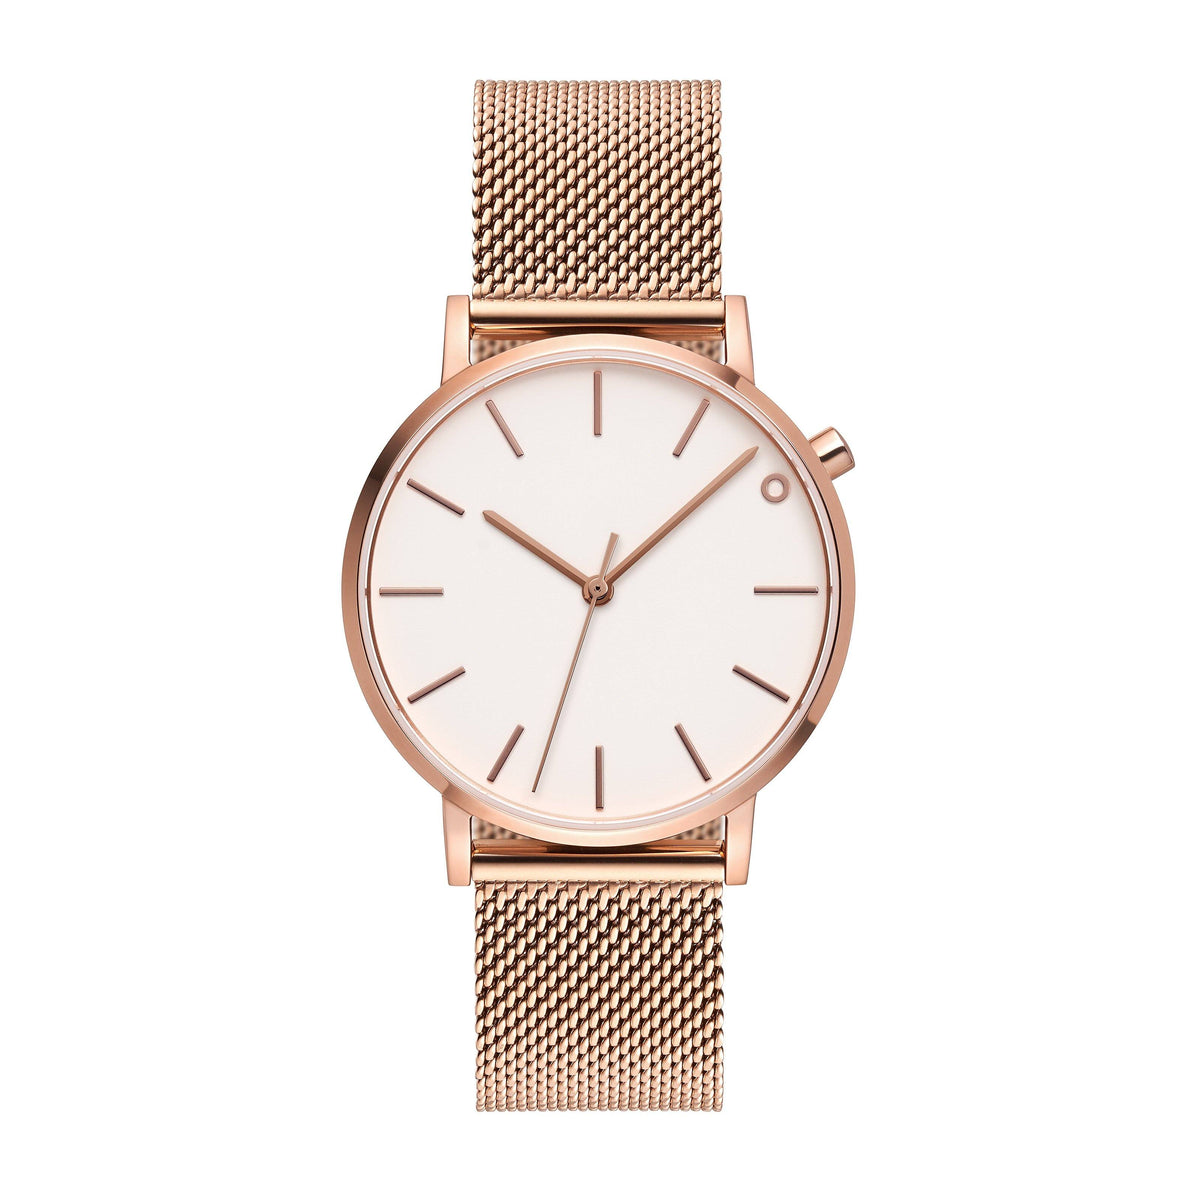 The White and Rose Gold Watch - Mesh